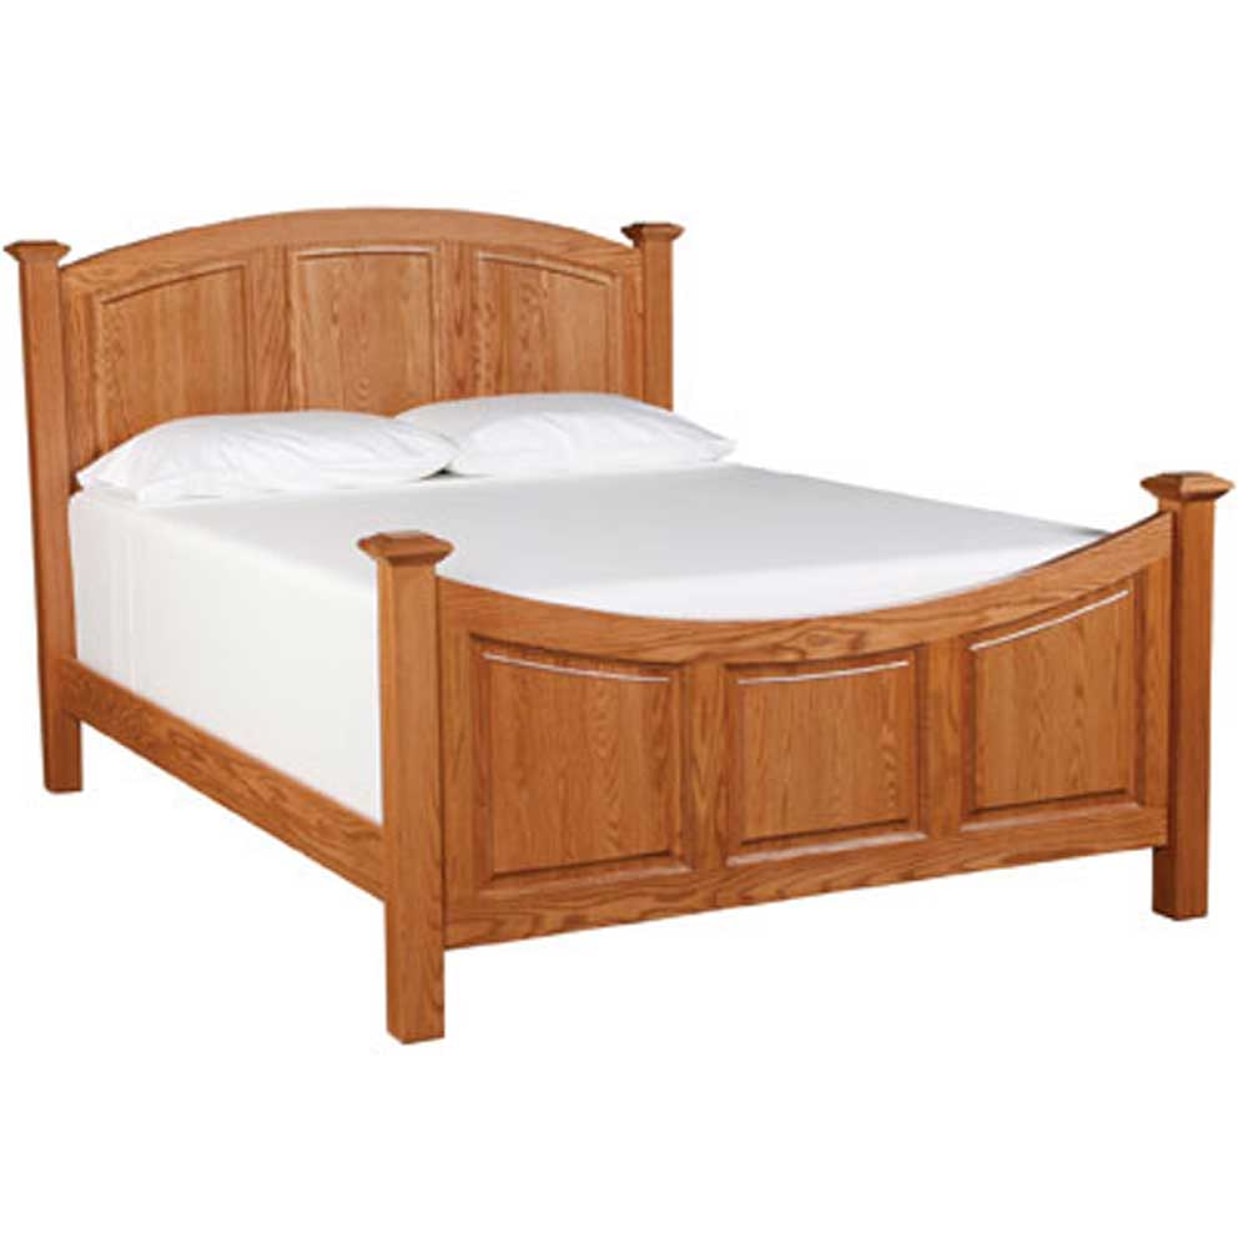 Simply Amish Homestead Amish King Lexington Bed